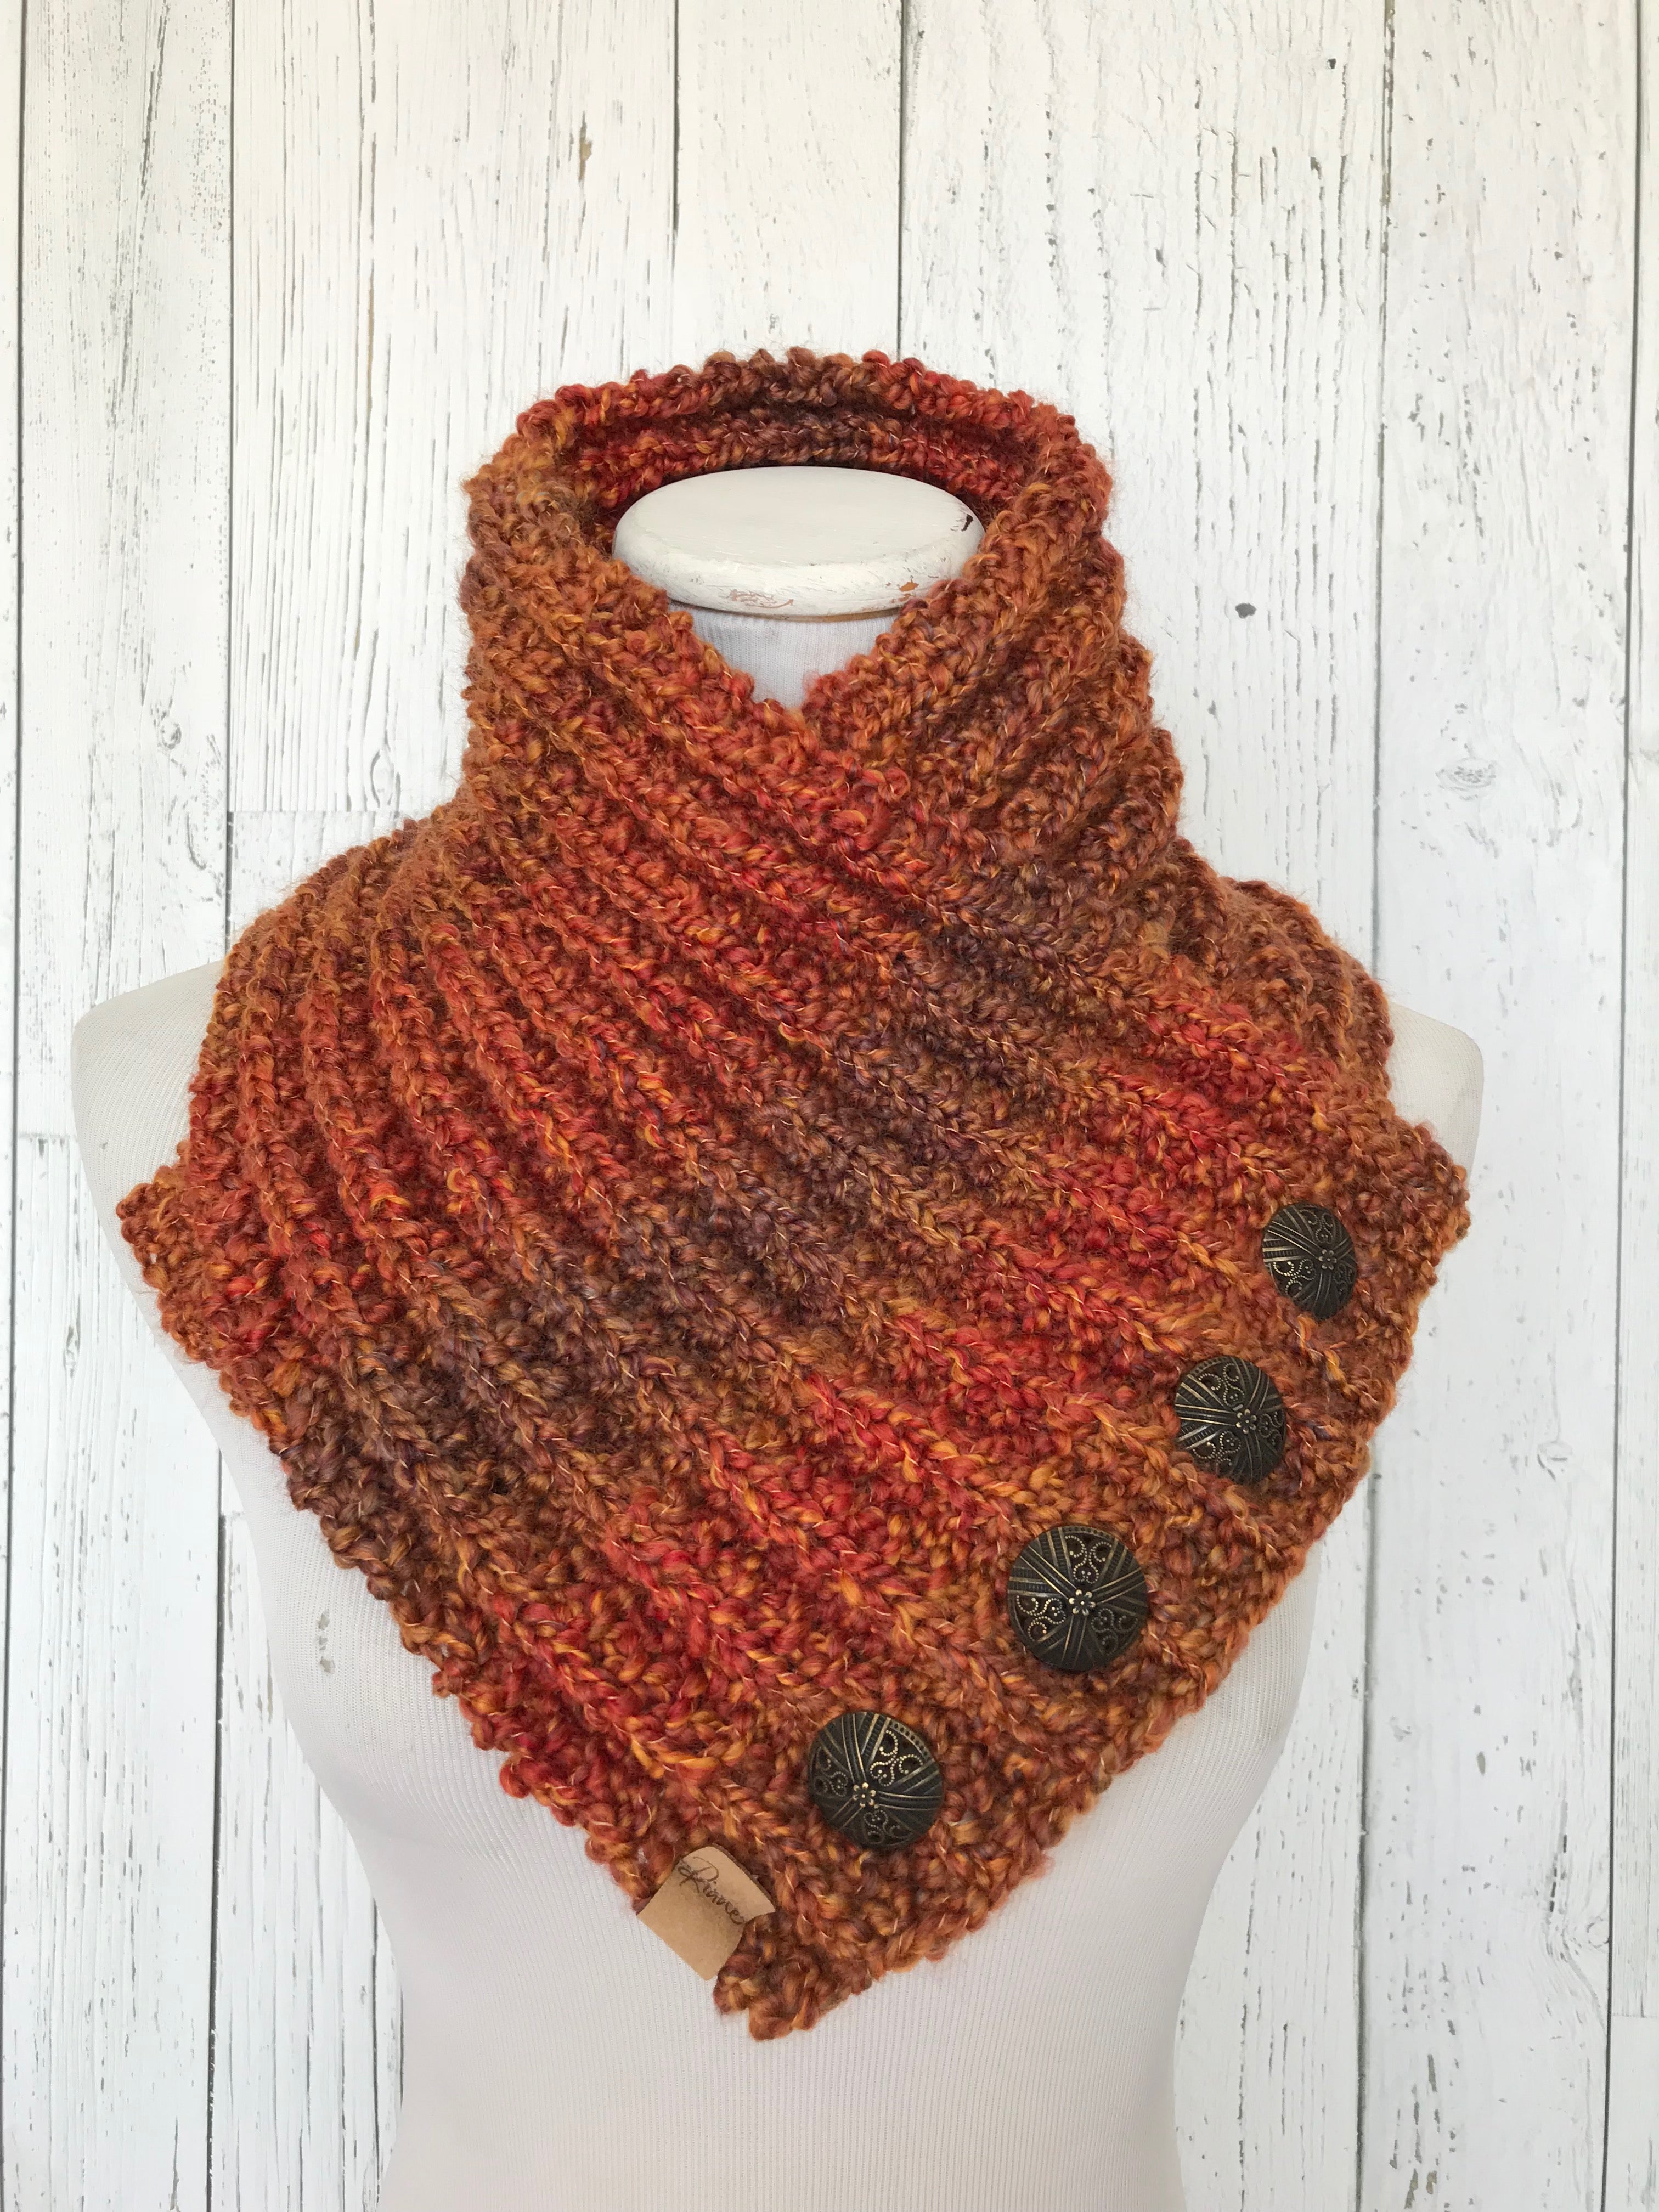 Classic Knit Button Cowl in prairie fire, oranges with bronze buttons